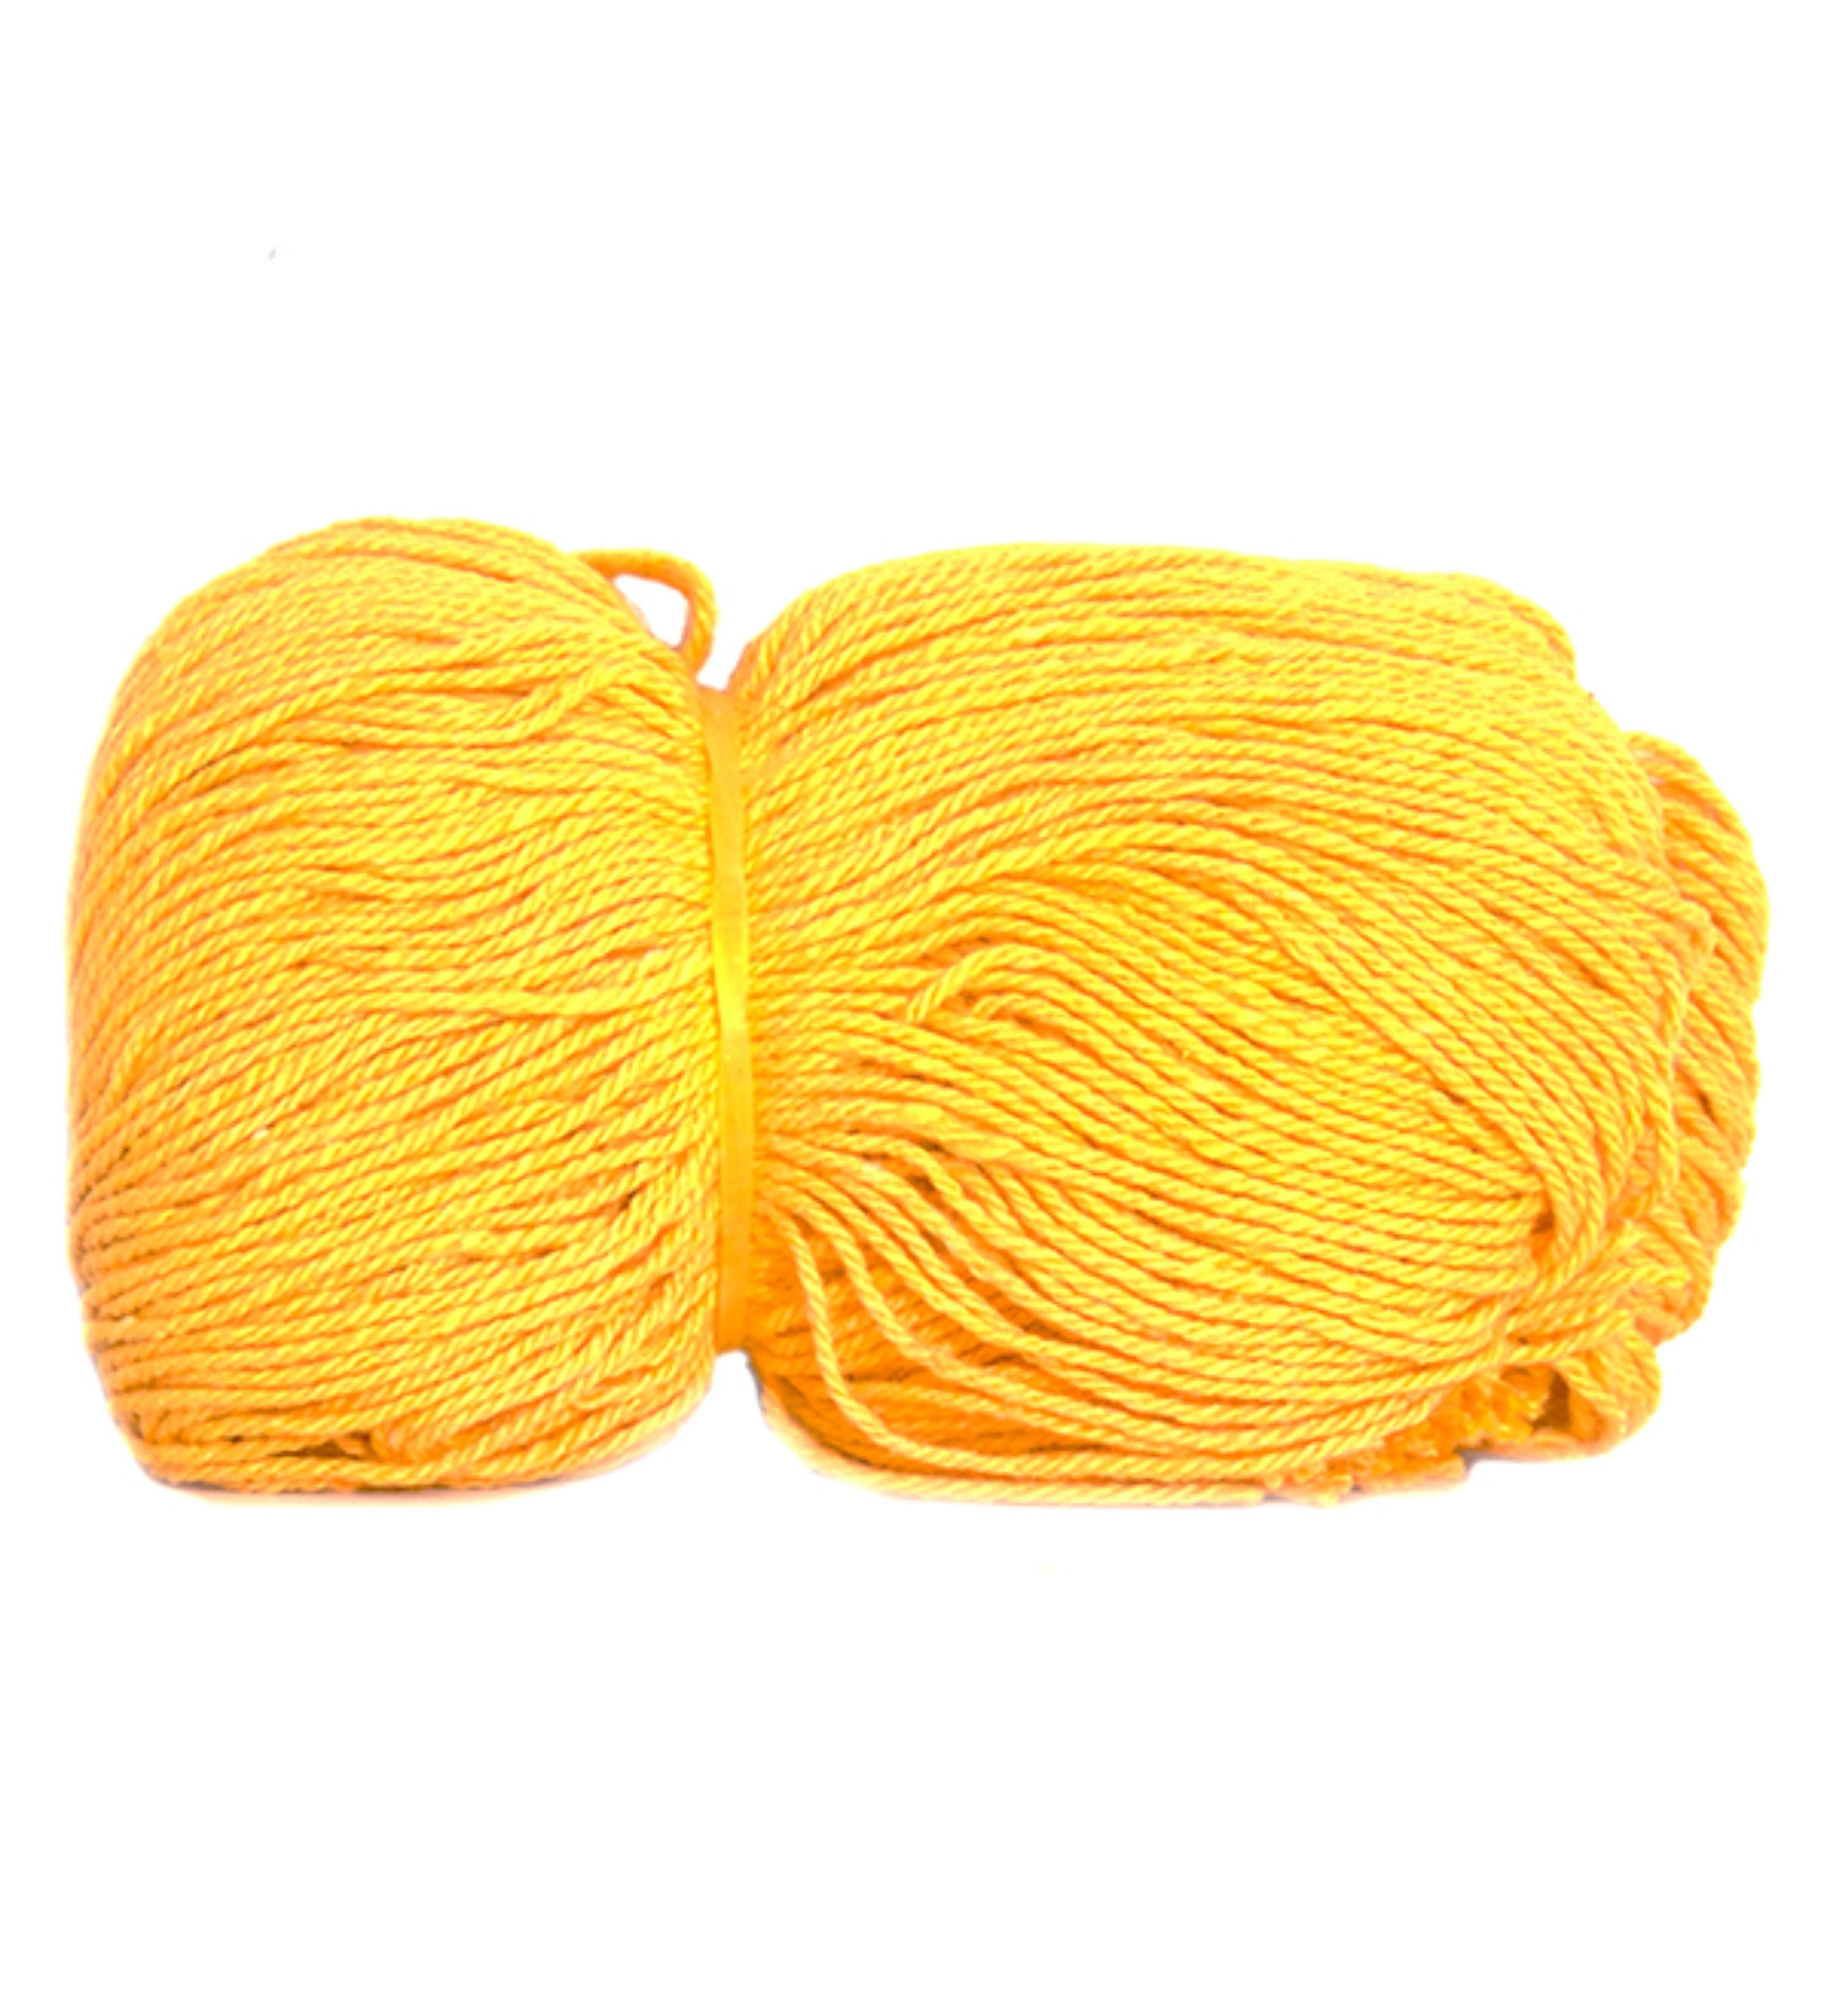 Buy Cotton Braided 10 mm Ropes Yellow online at best rates in India